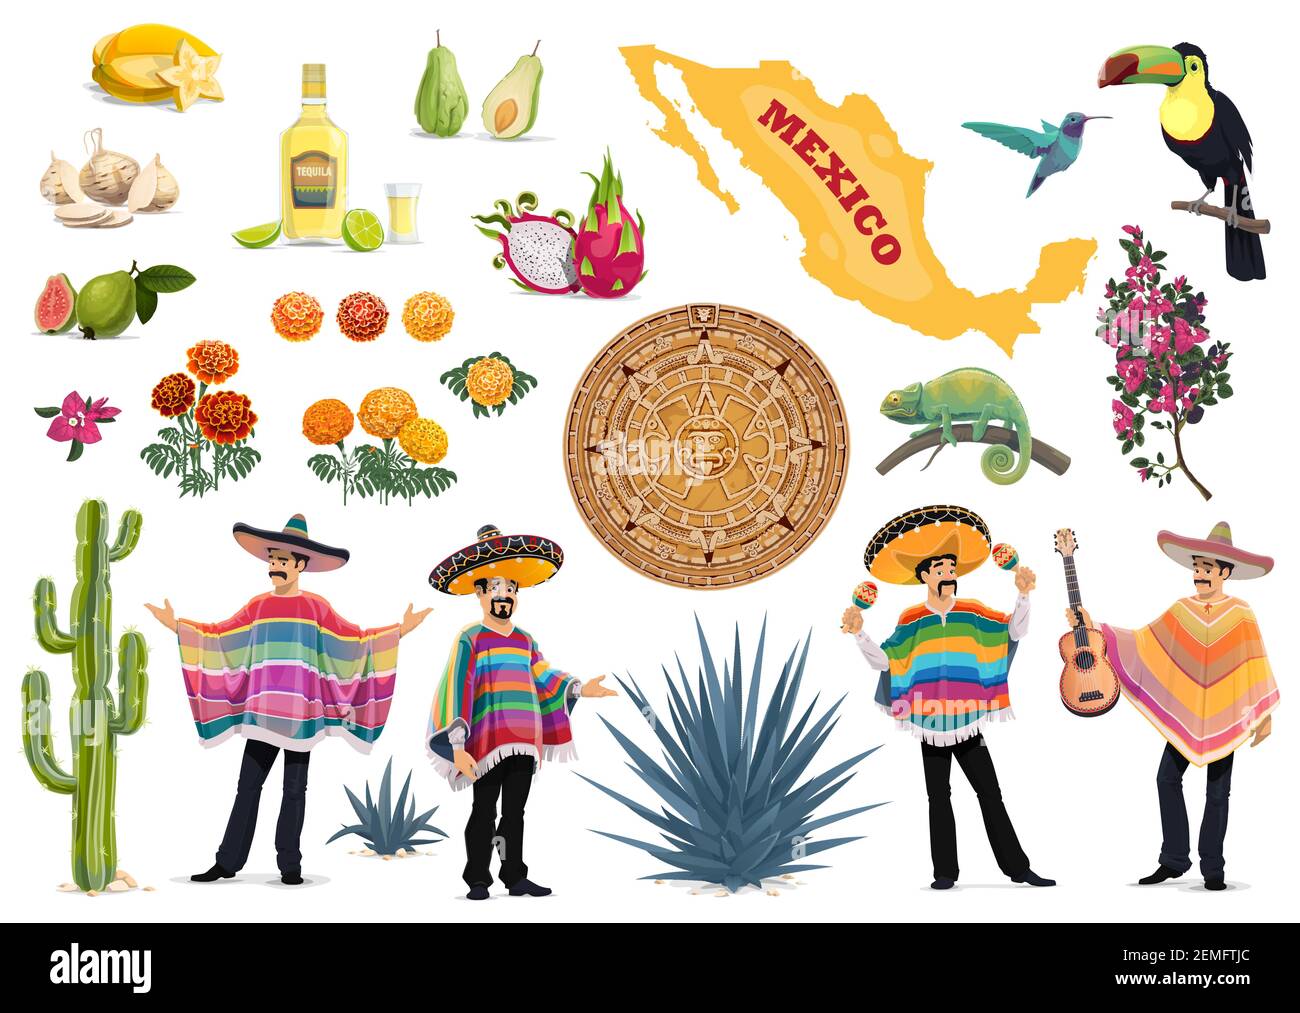 Mexico vector set with Mexican food, culture and travel symbols. Cactus, guitar, sombrero and tequila, Mexican men with poncho, maracas, map, aztec su Stock Vector